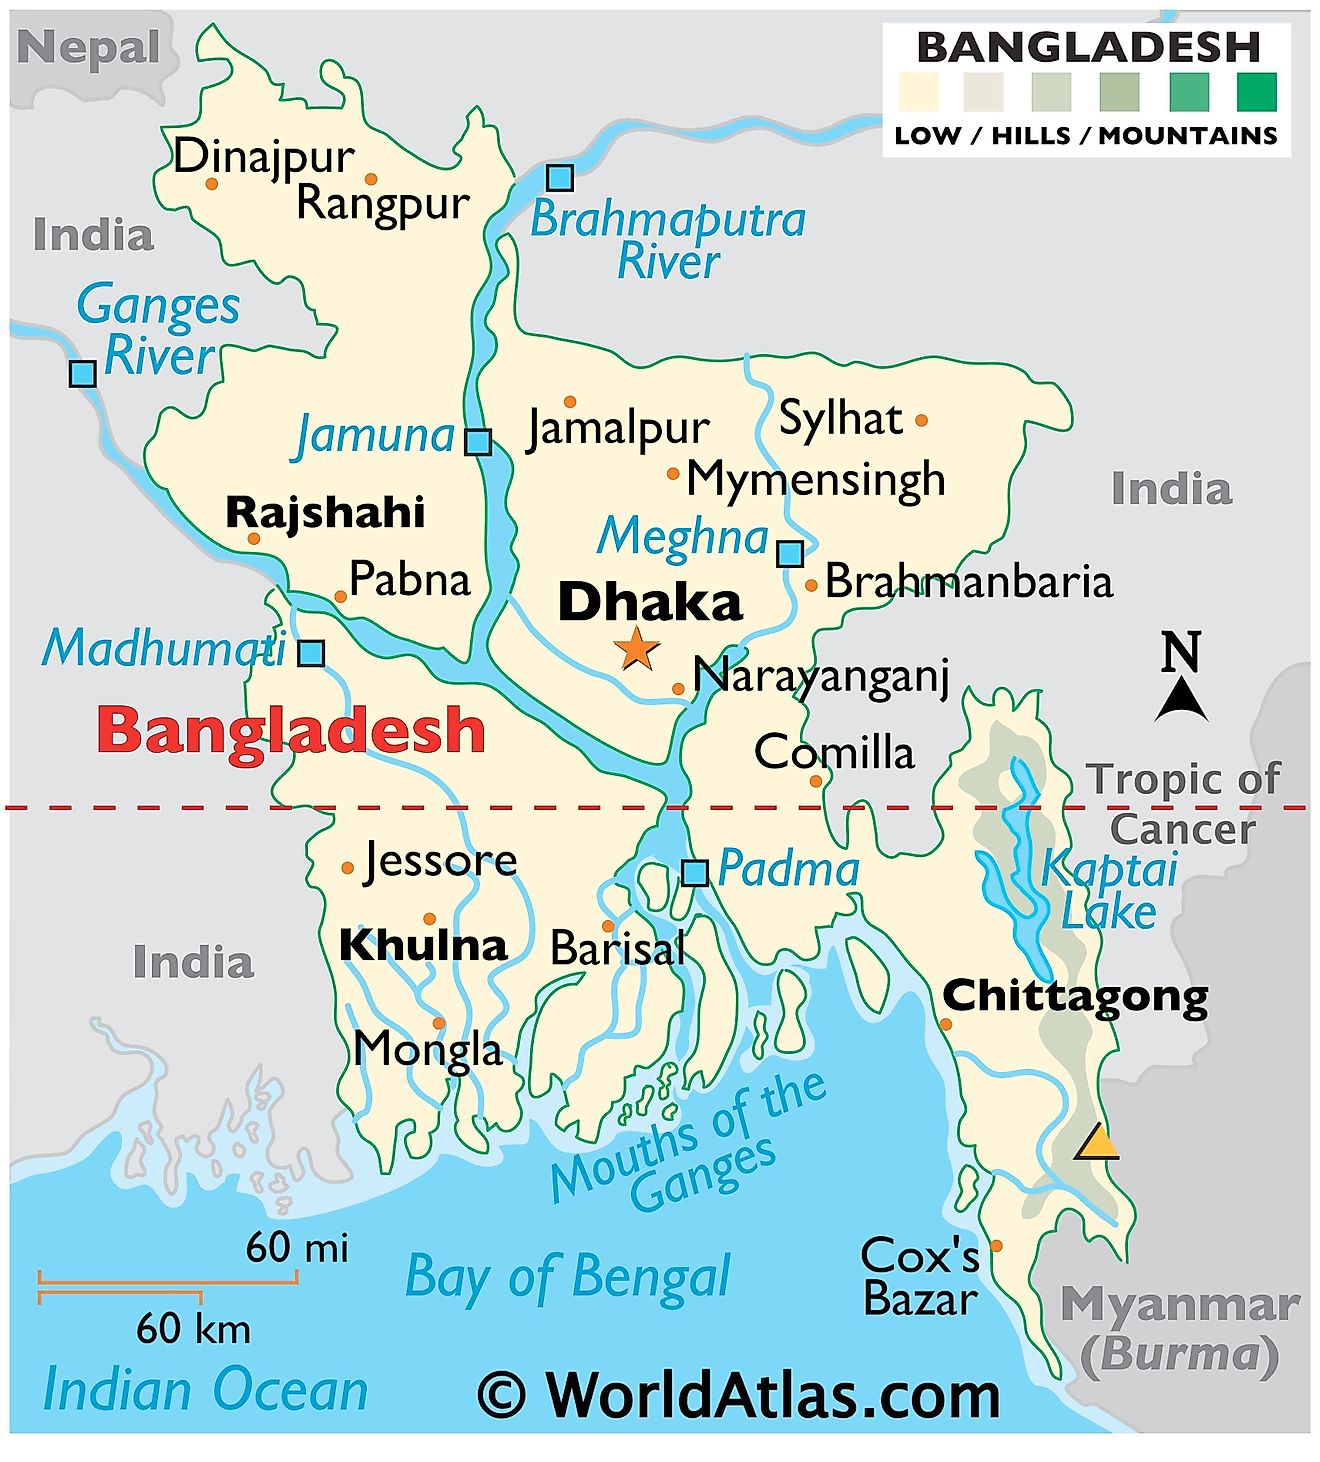 Physical Map of Bangladesh showing international boundaries, relief, highest point, important cities, major rivers, lakes, and more.